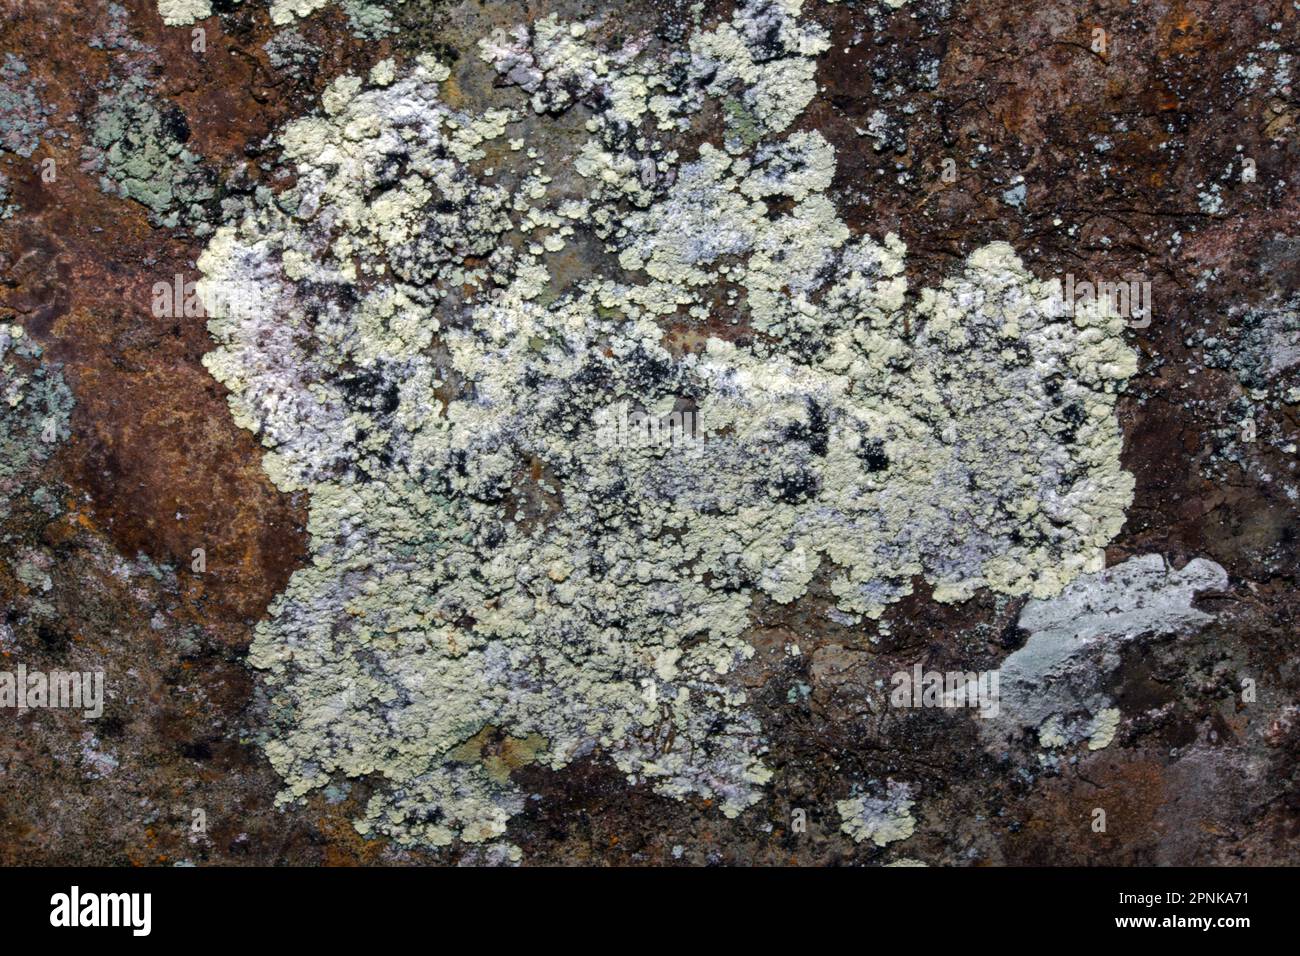 Lepraria finkii is crustose lichen common in shaded habitats, especially moist tree bases and rocks. It has a global distribution. Stock Photo